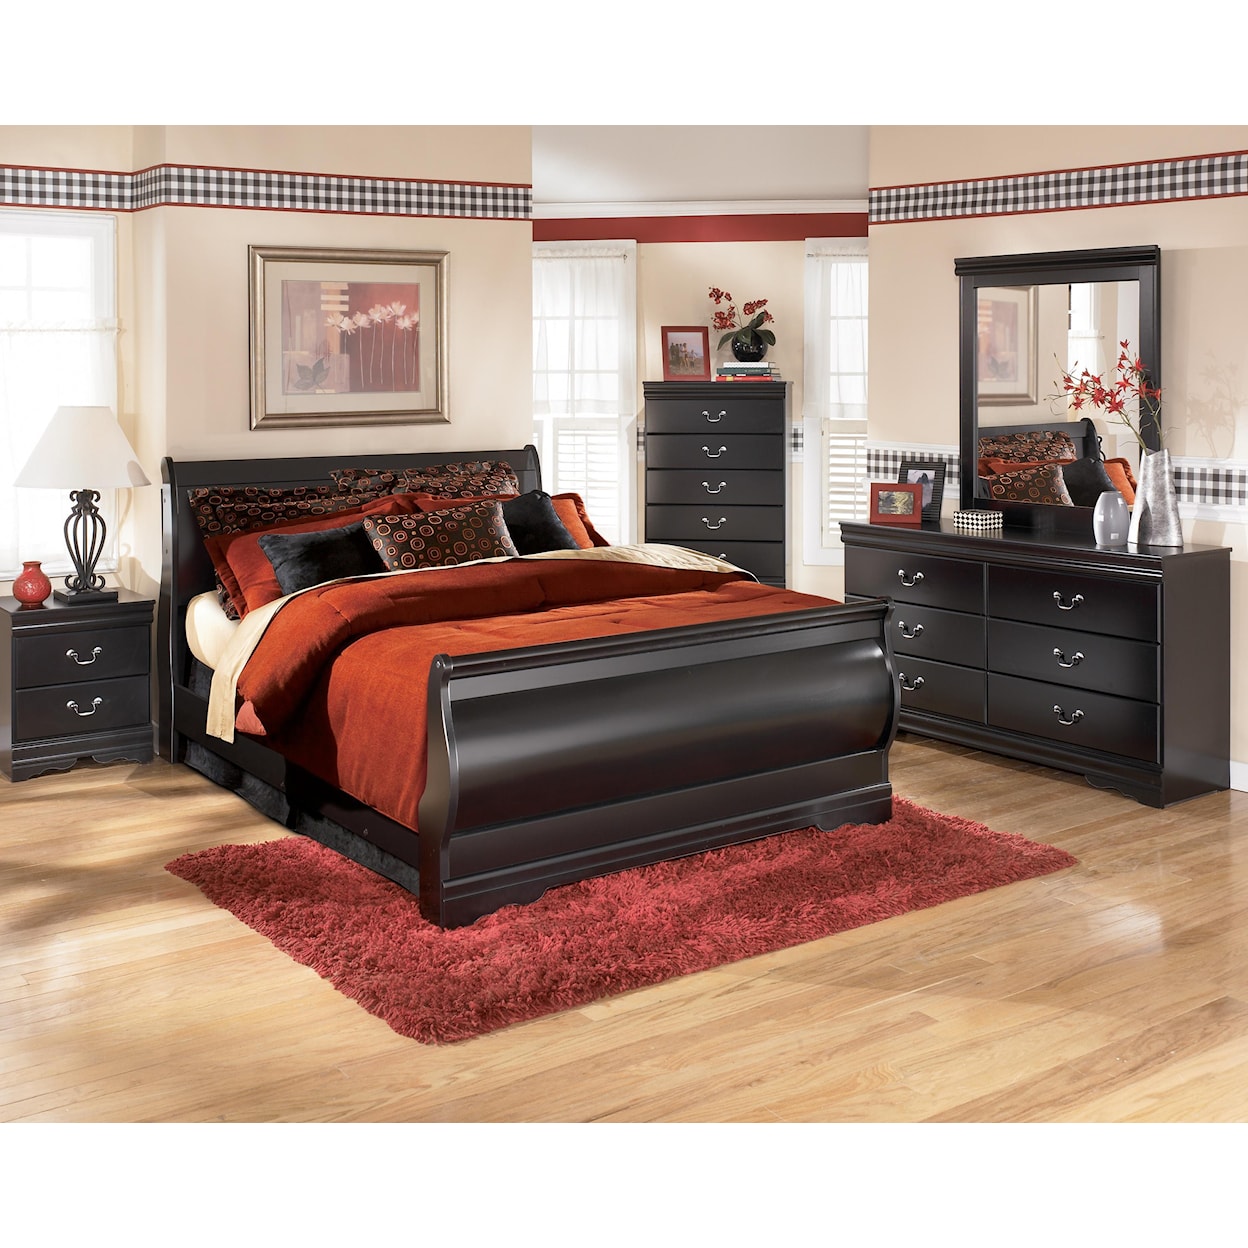 Signature Design by Ashley Furniture Huey Vineyard 4 Piece Bedroom Group